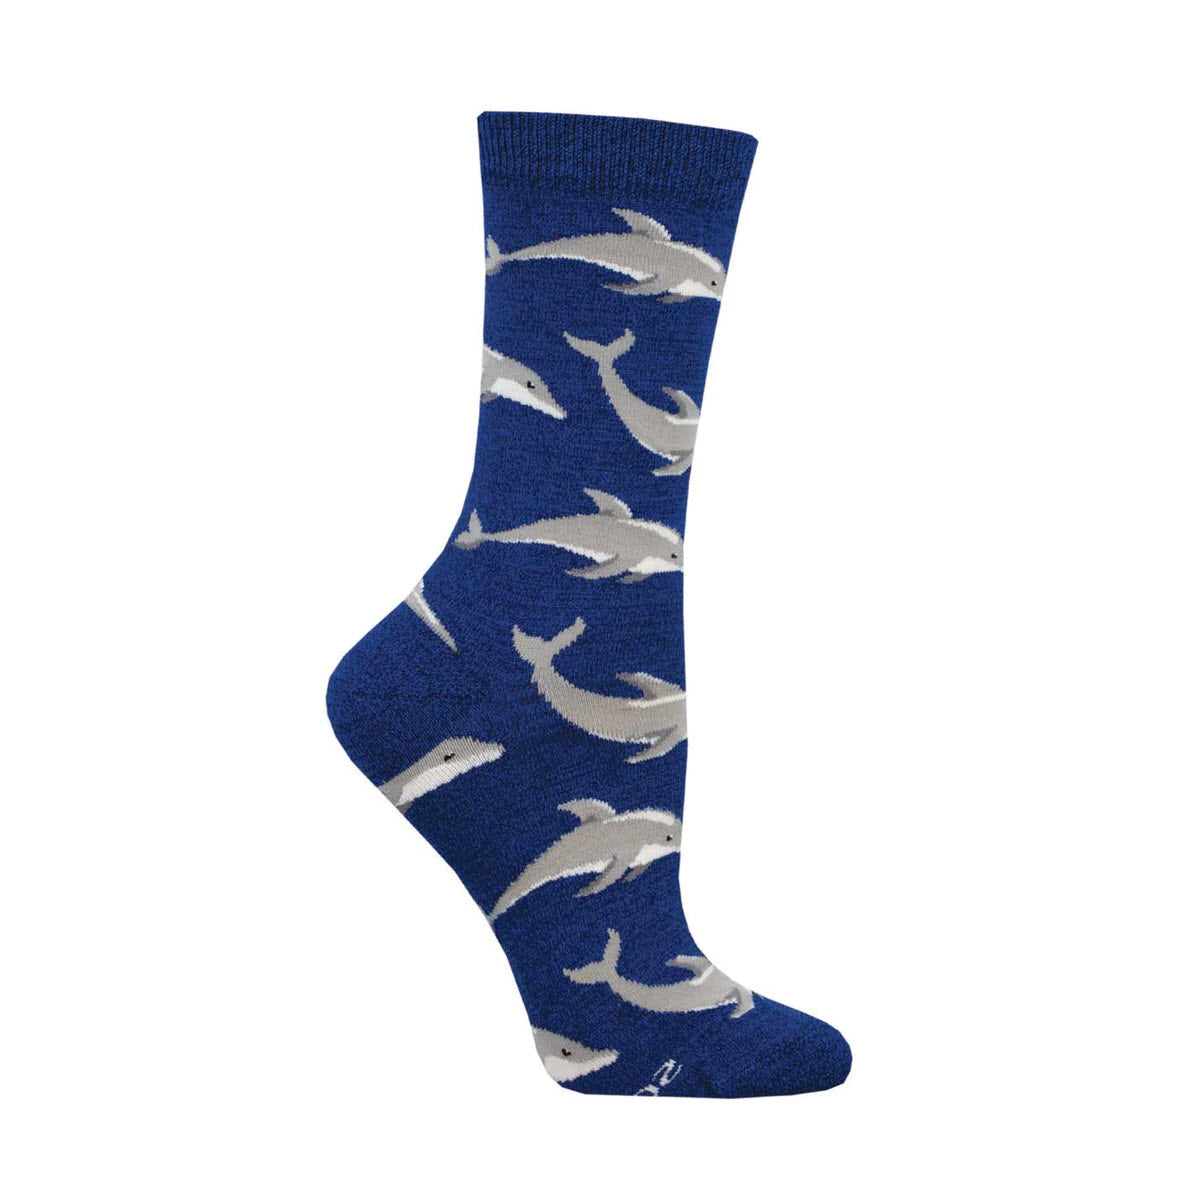 A single SOCKSMITH BAMBOO CREW SOCKS JOYOUS DOLPHINS BLUE - WOMENS with a fun white and gray dolphin pattern displayed against a white background.